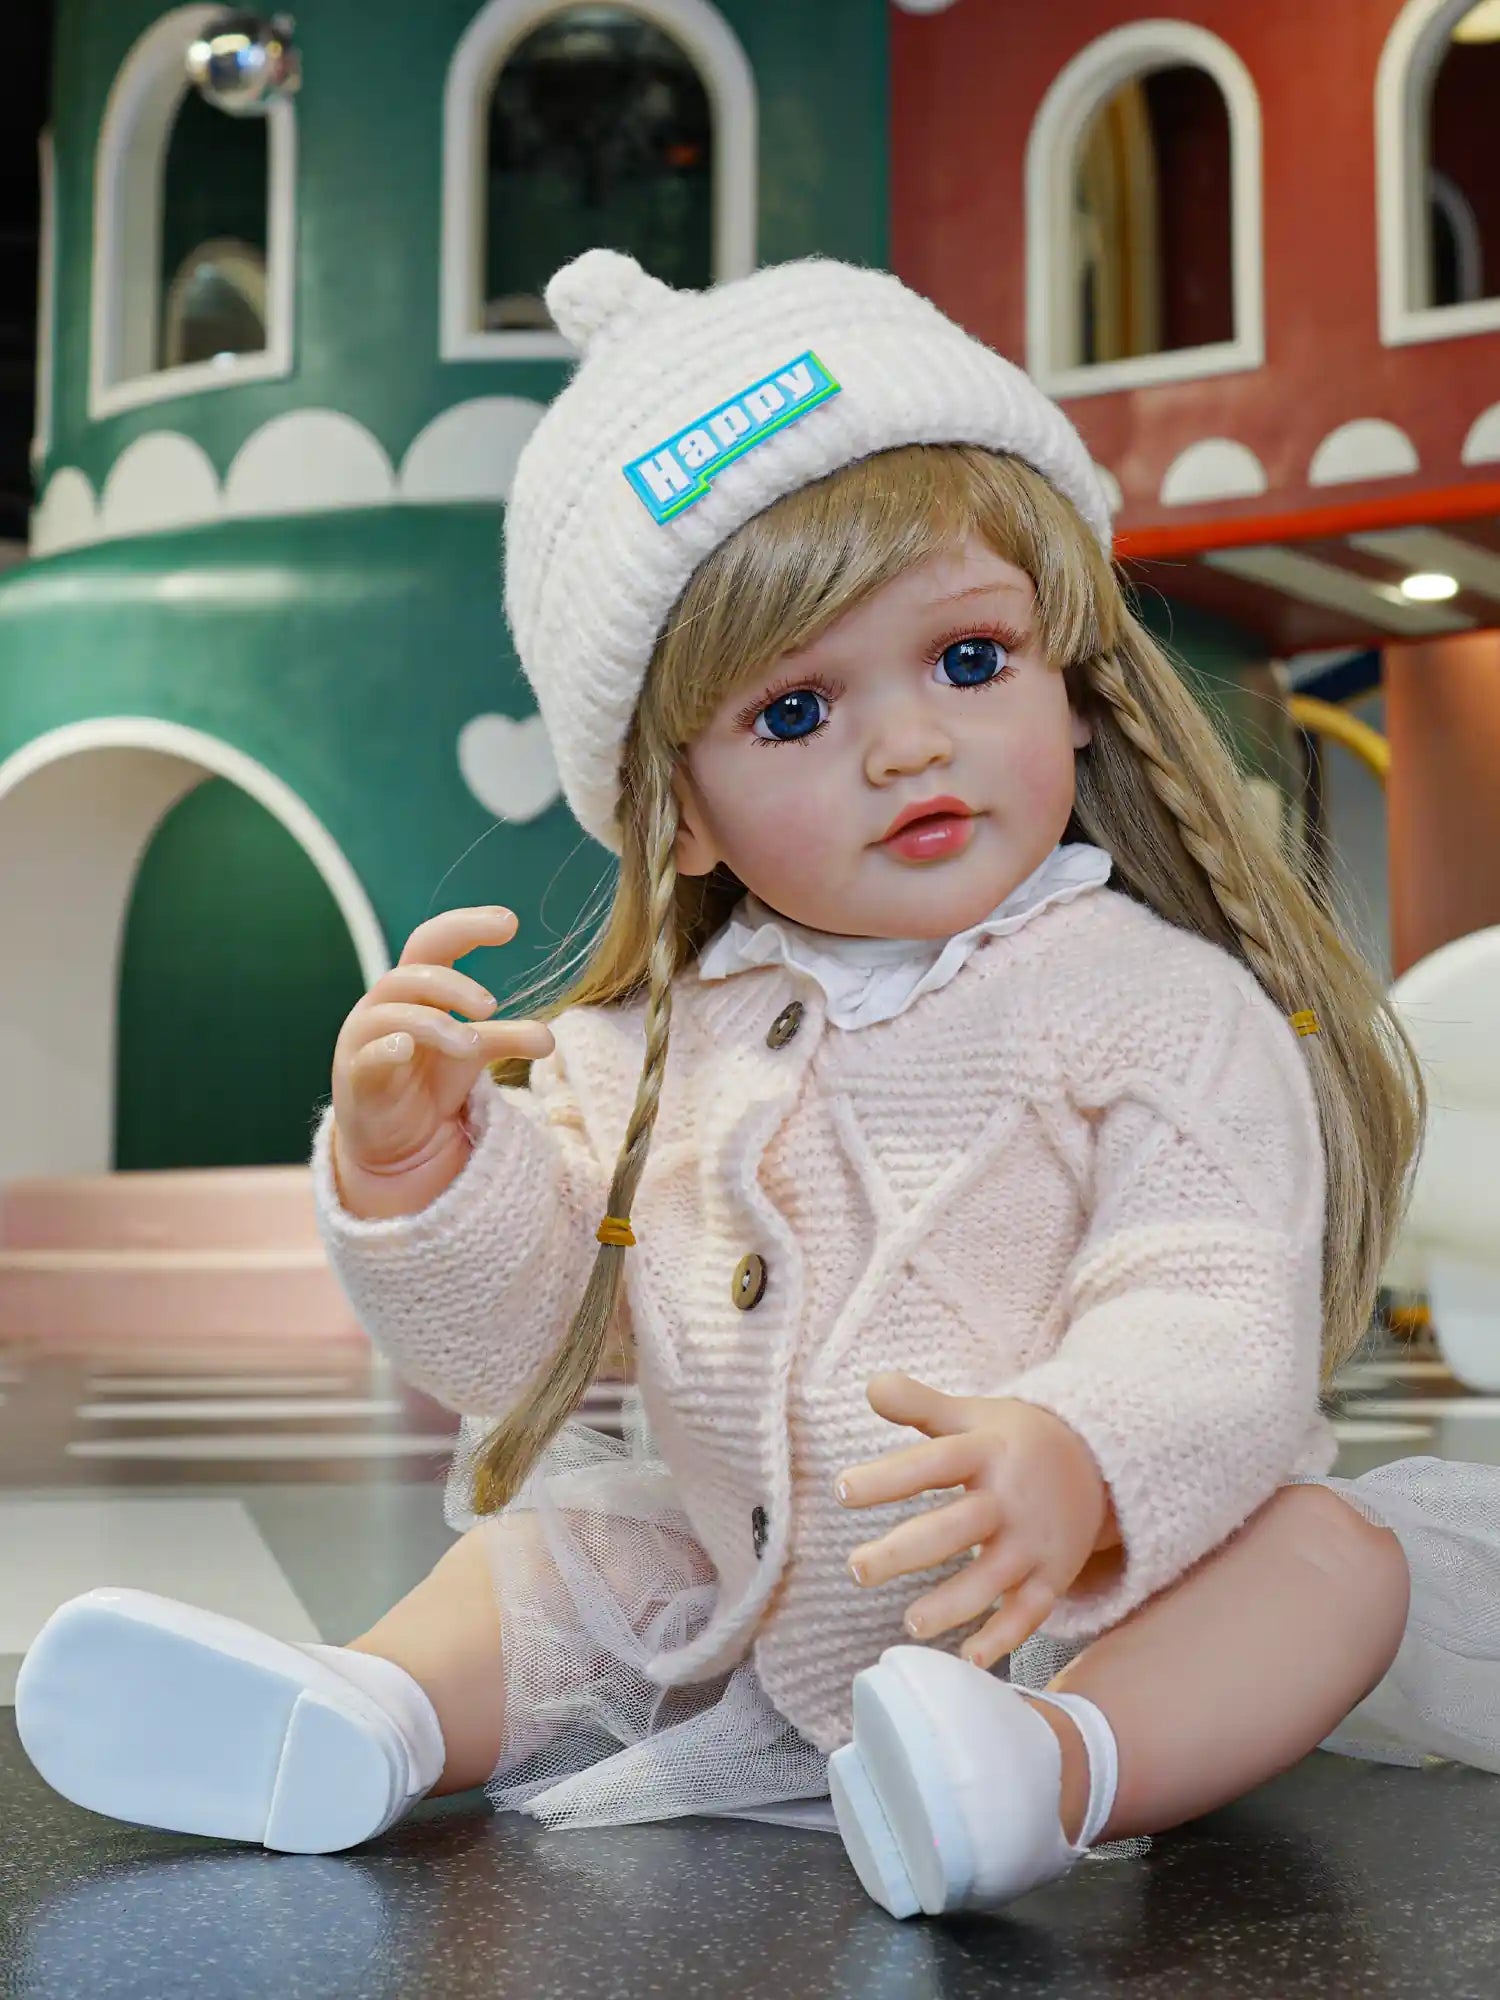 Bundle up with this sweet reborn doll, her winter-ready ensemble complete with a knit hat, is a hug waiting to happen.